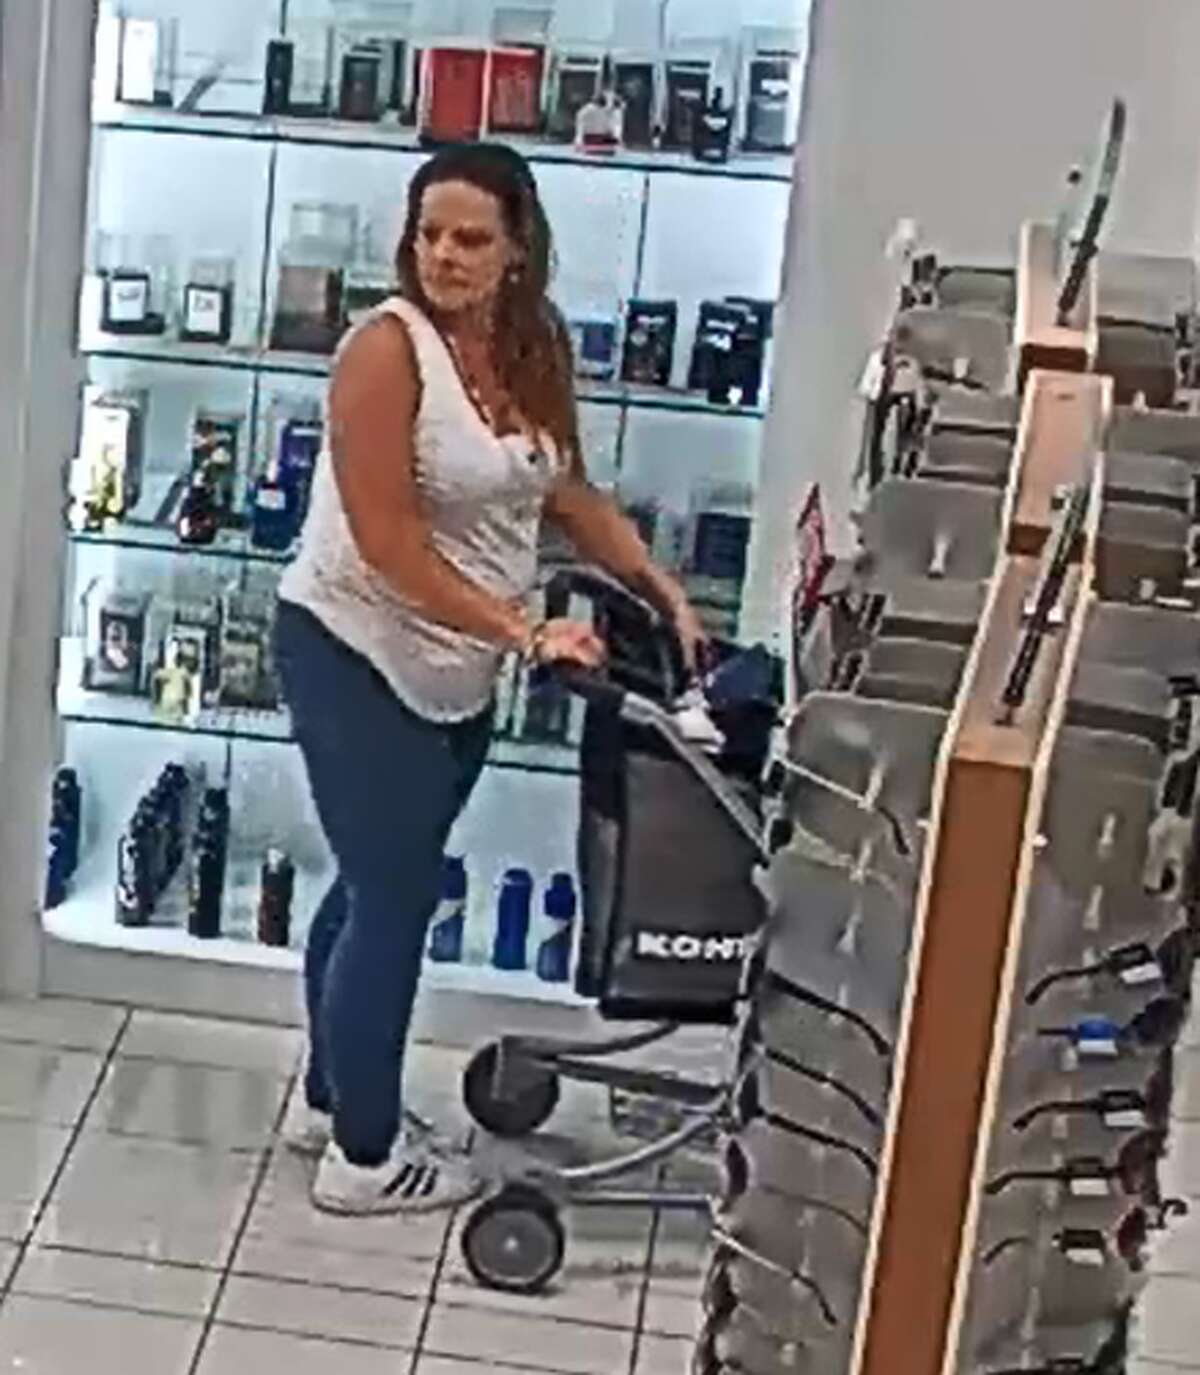 The woman captured by surveillance cameras is accused of stealing $817.50 worth of merchandise from Kohls.